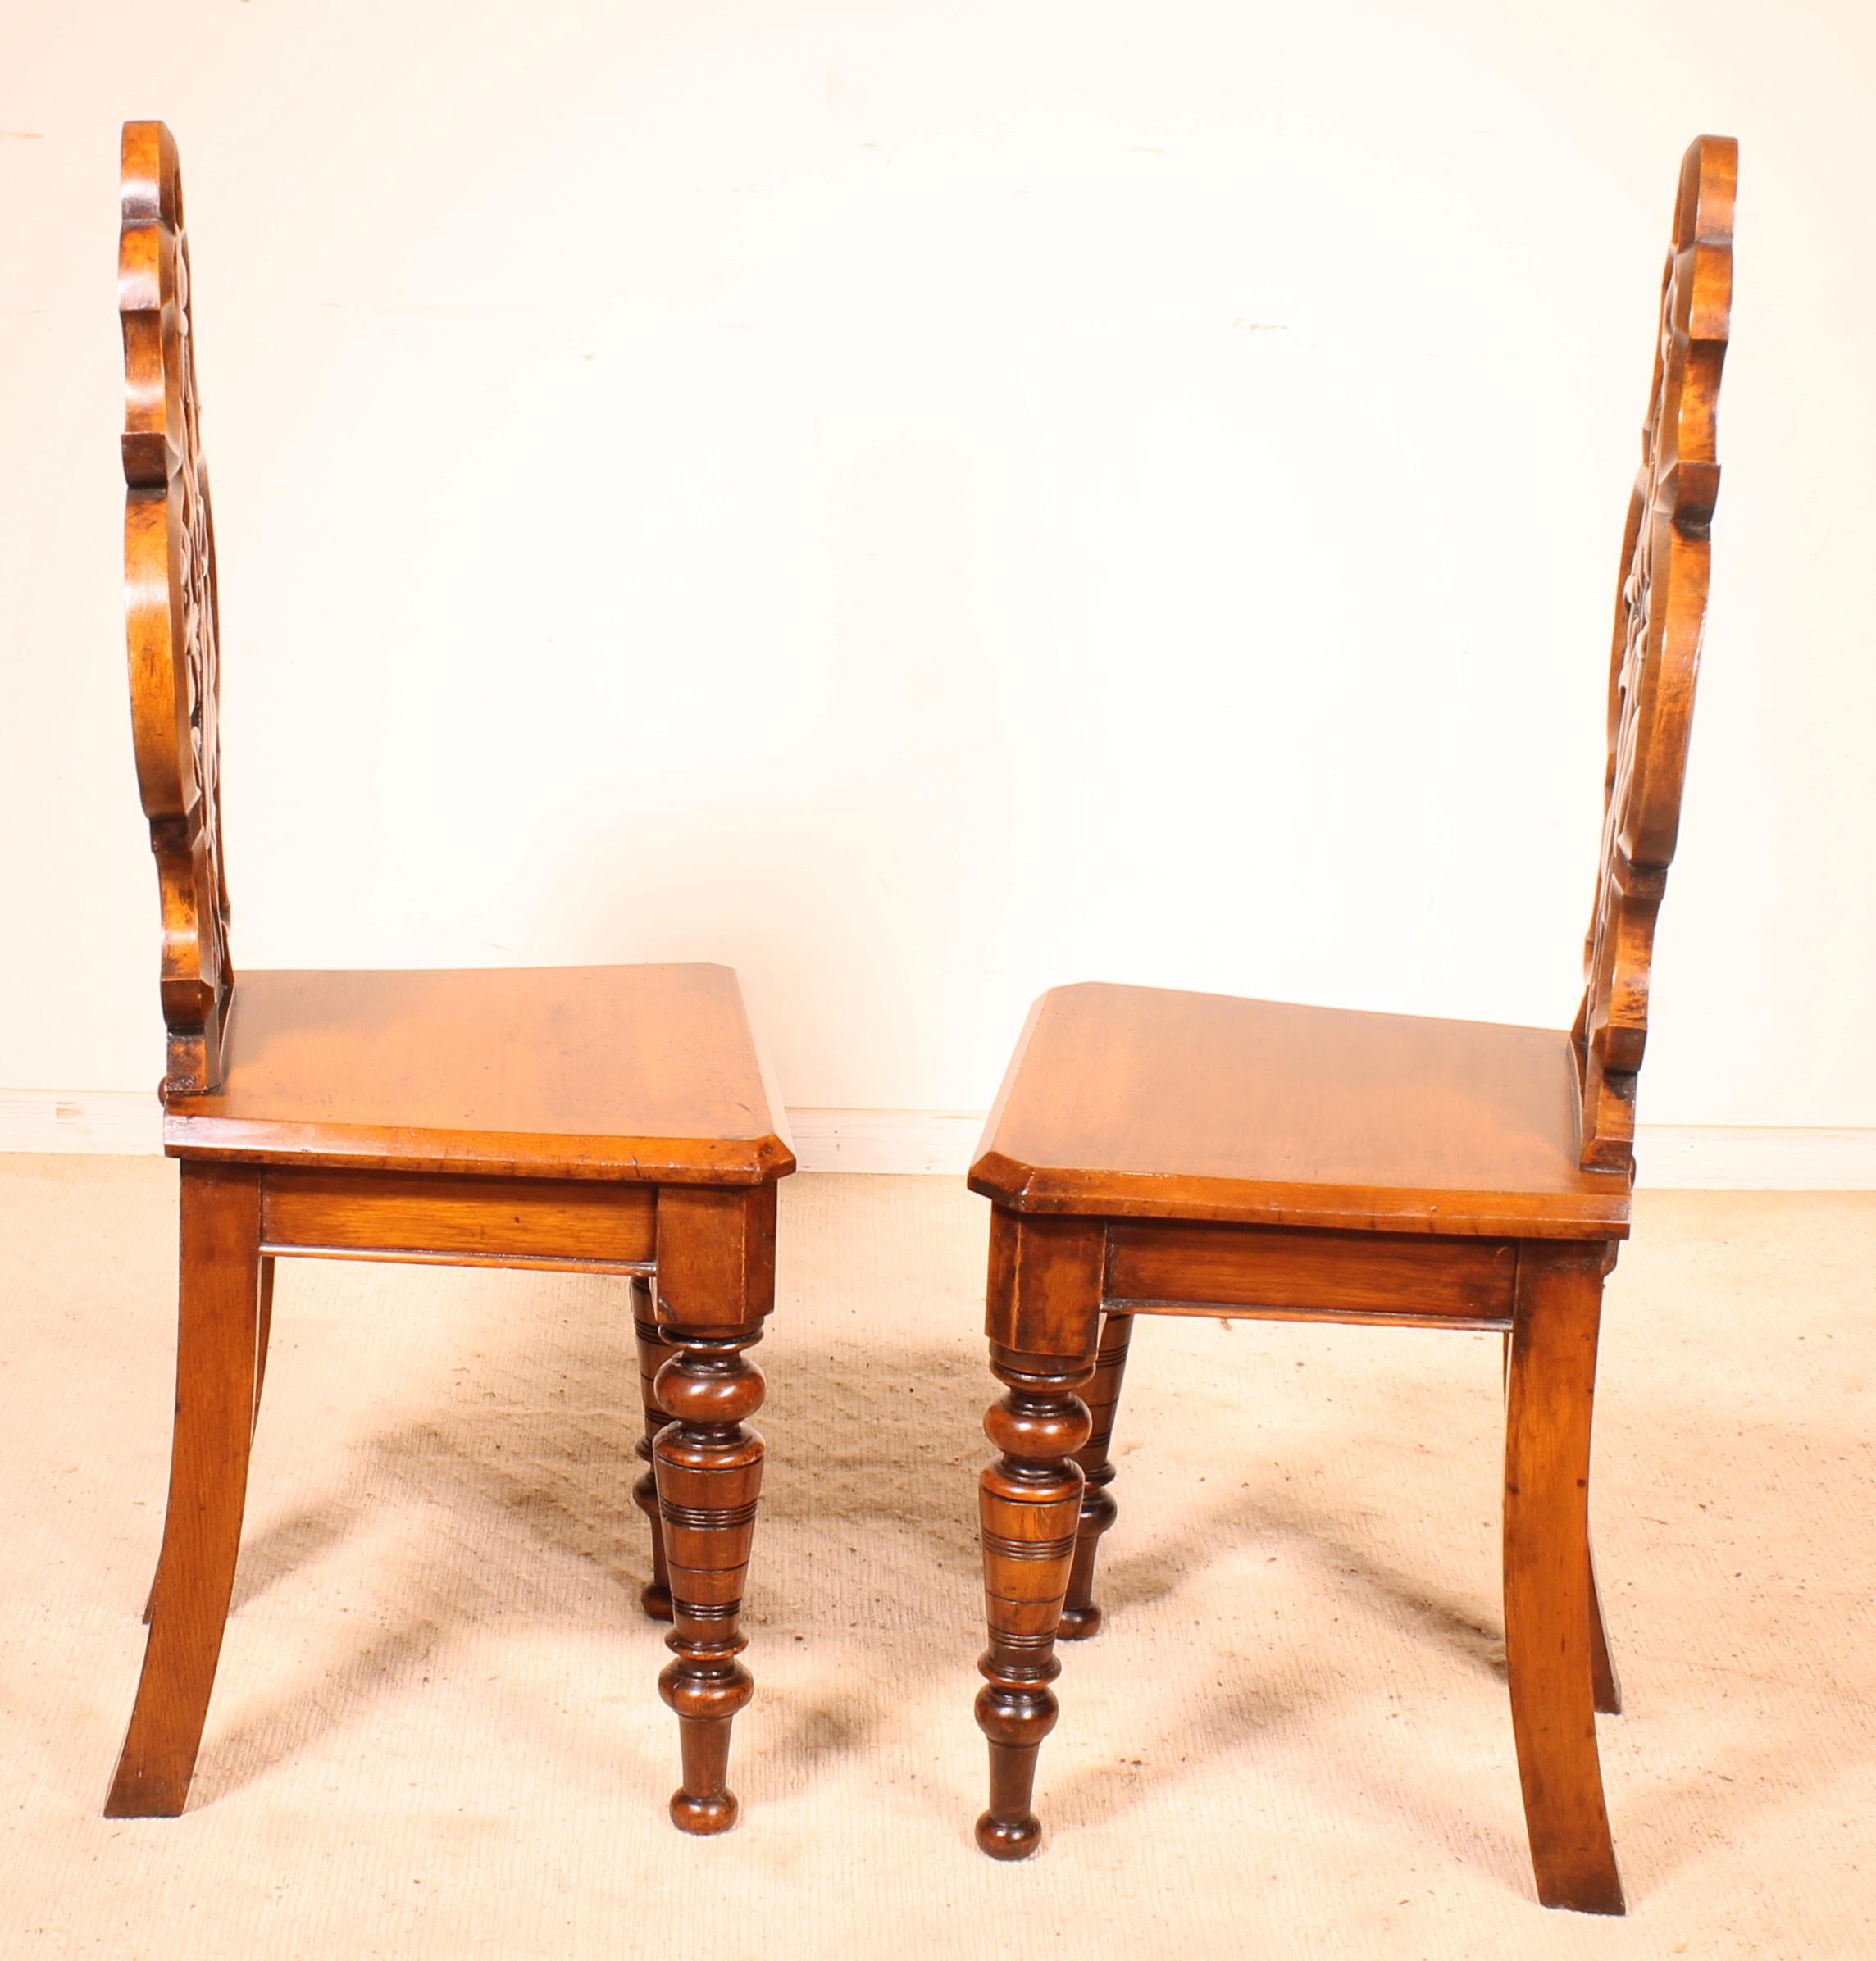 Superb pair of English chairs called 